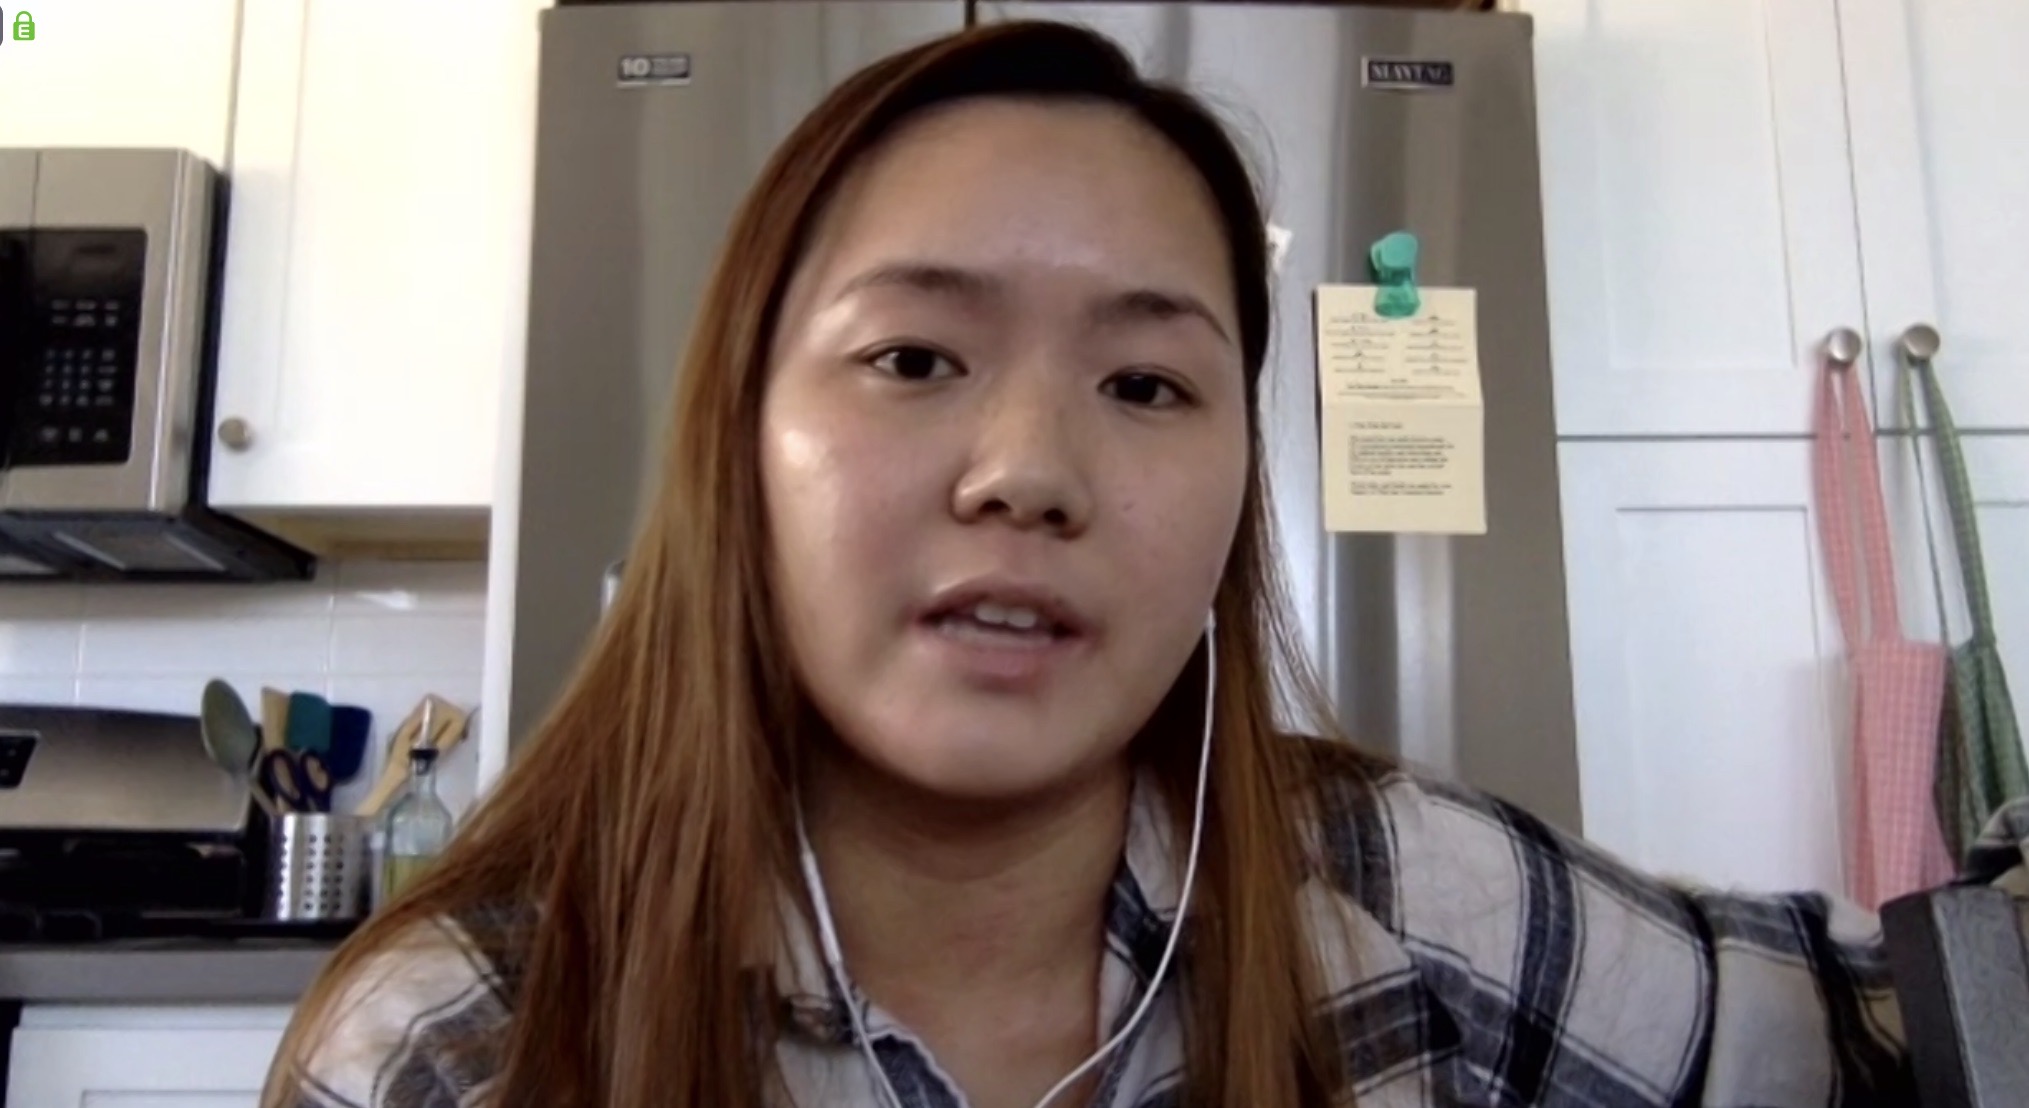 Shirley Deng of Hayward is in the market for a marketing job in Silicon Valley. She's getting call backs, but says she'd have an easier time of it if she was looking for a position on the techier side of tech.